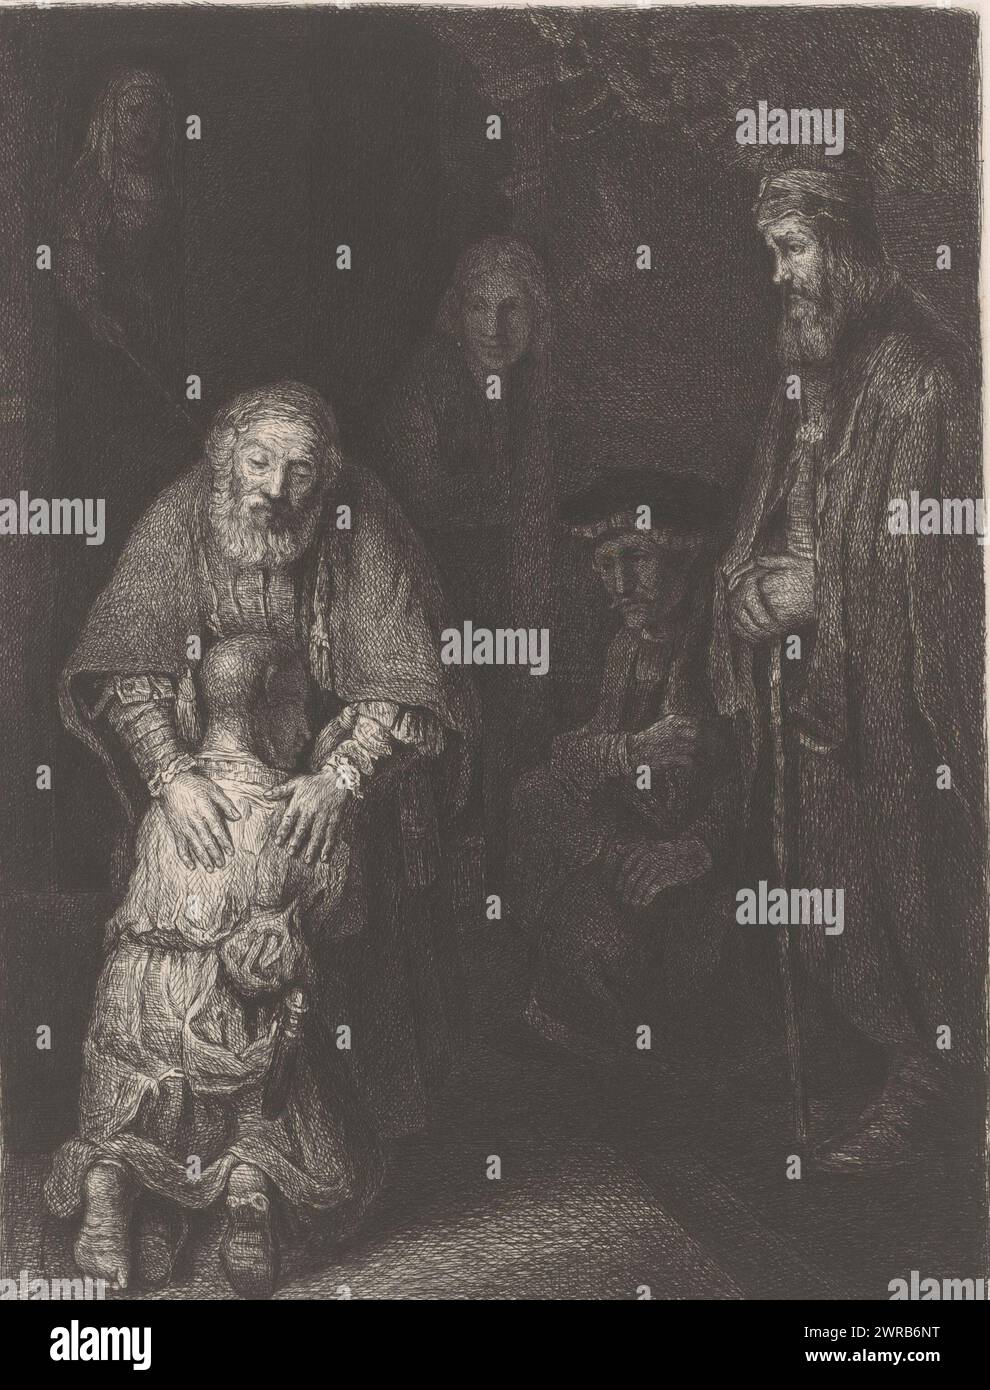 Return of the Prodigal Son, print maker: Nikolay Semyonovich Mosolov, (attributed to), after painting by: Rembrandt van Rijn, 1857 - 1914, paper, etching, drypoint, height 275 mm × width 199 mm, print Stock Photo